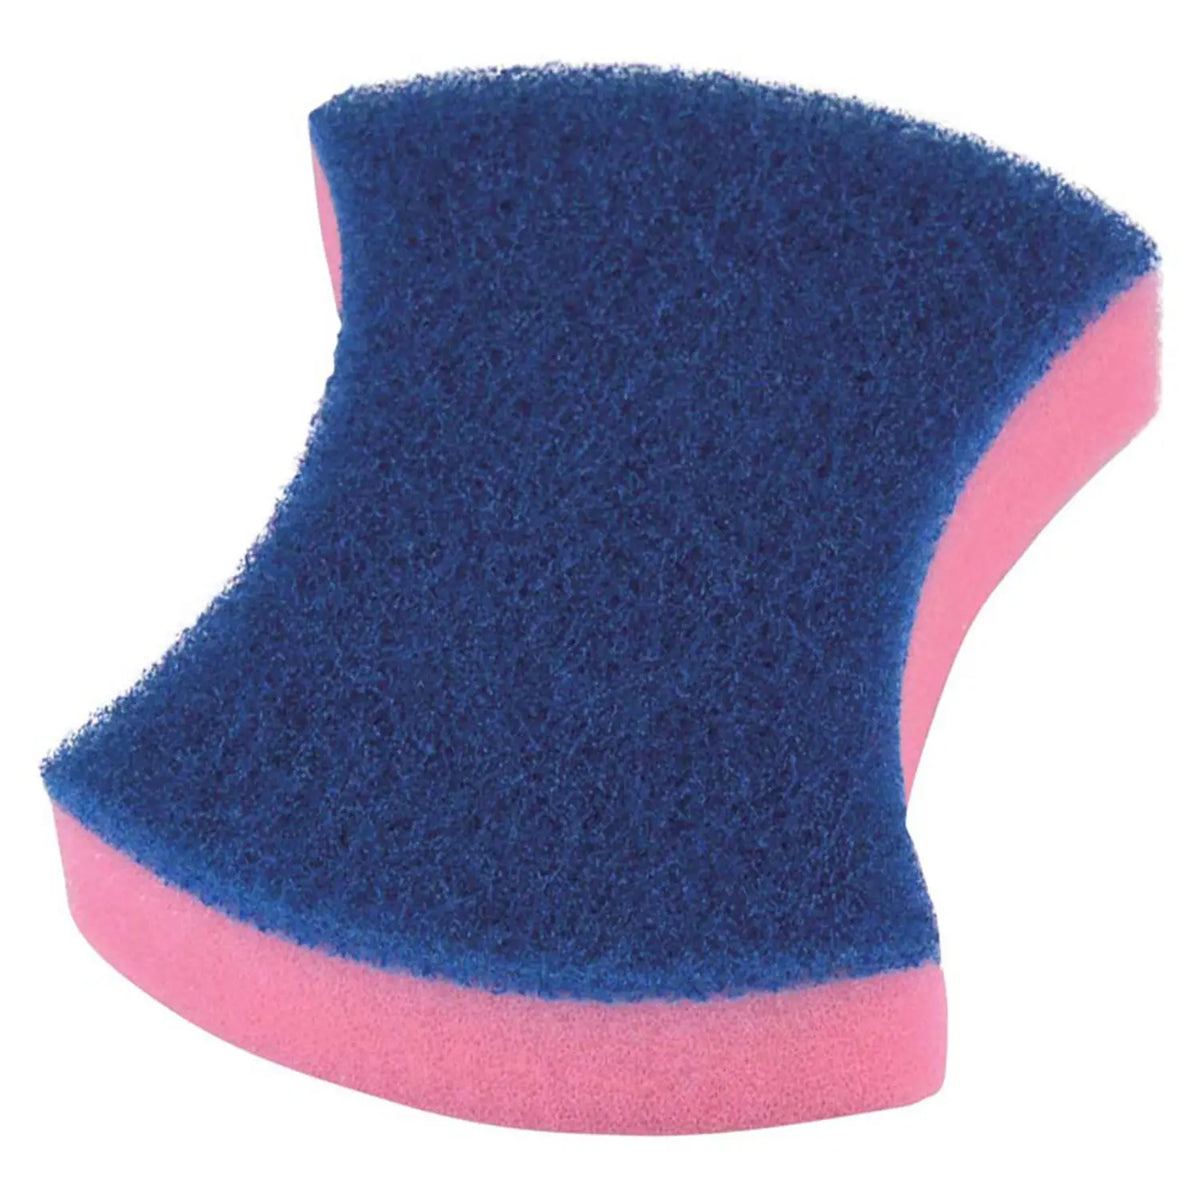 3M Scotch-Brite Polyester Cleaning Sponge